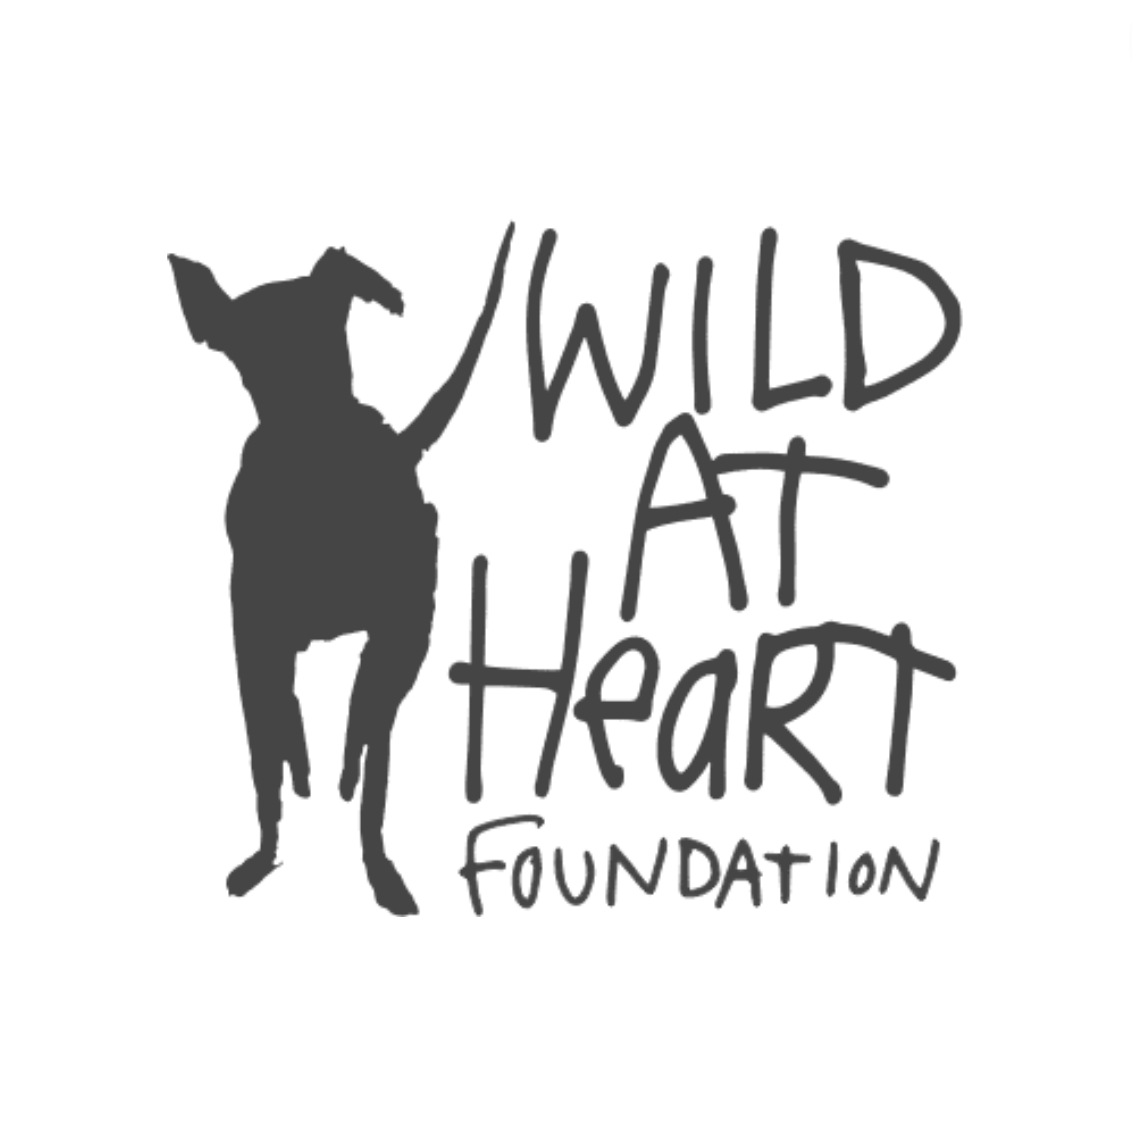 Donate to Wild at Heart Foundation